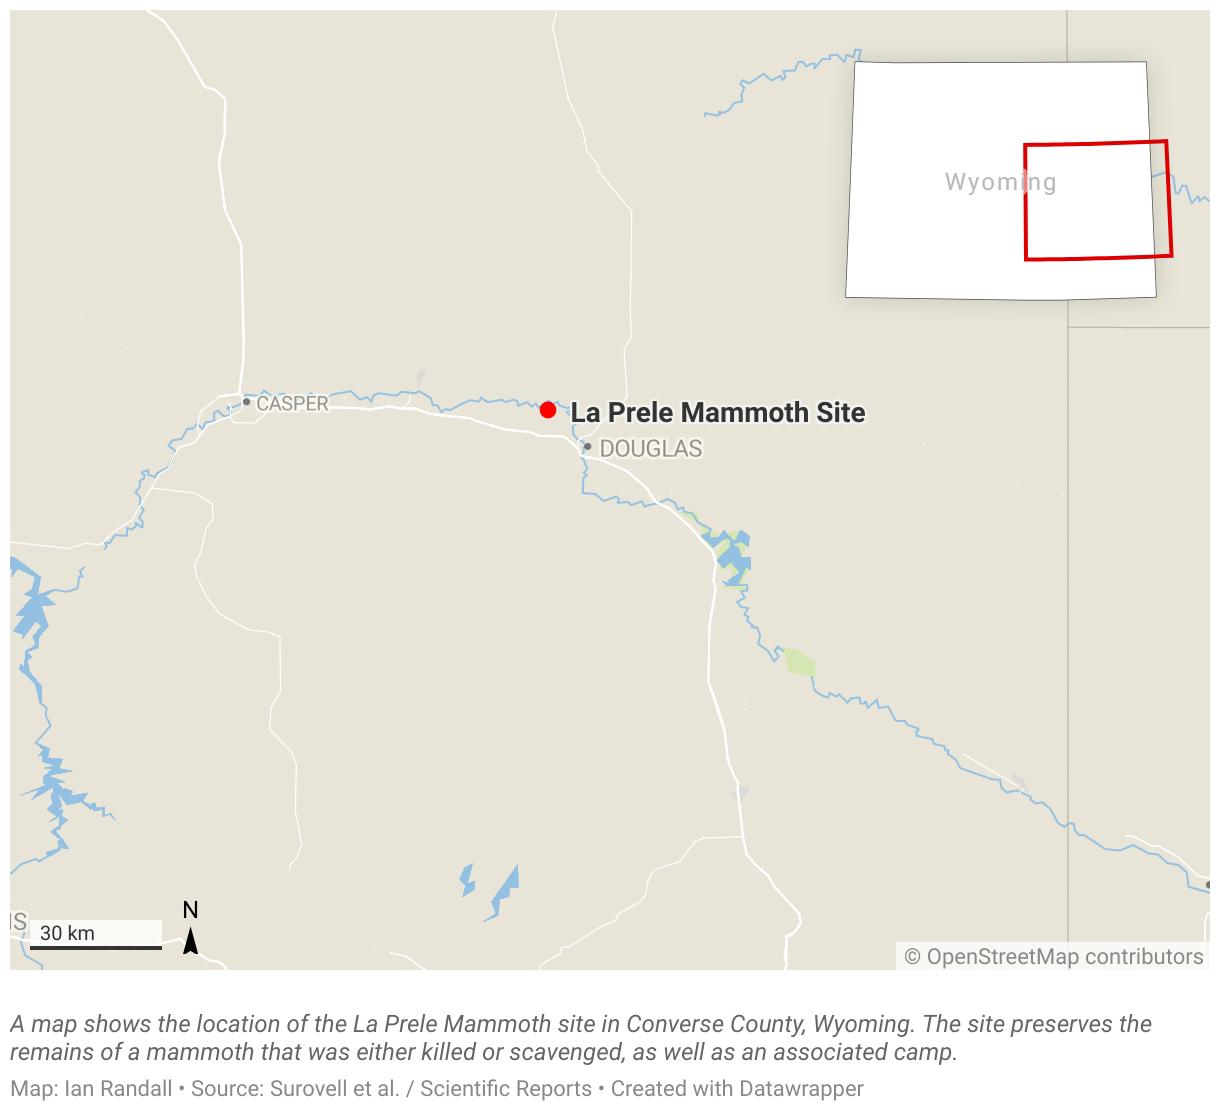 A map shows the location of the La Prele Mammoth Site in Converse County, Wyoming.